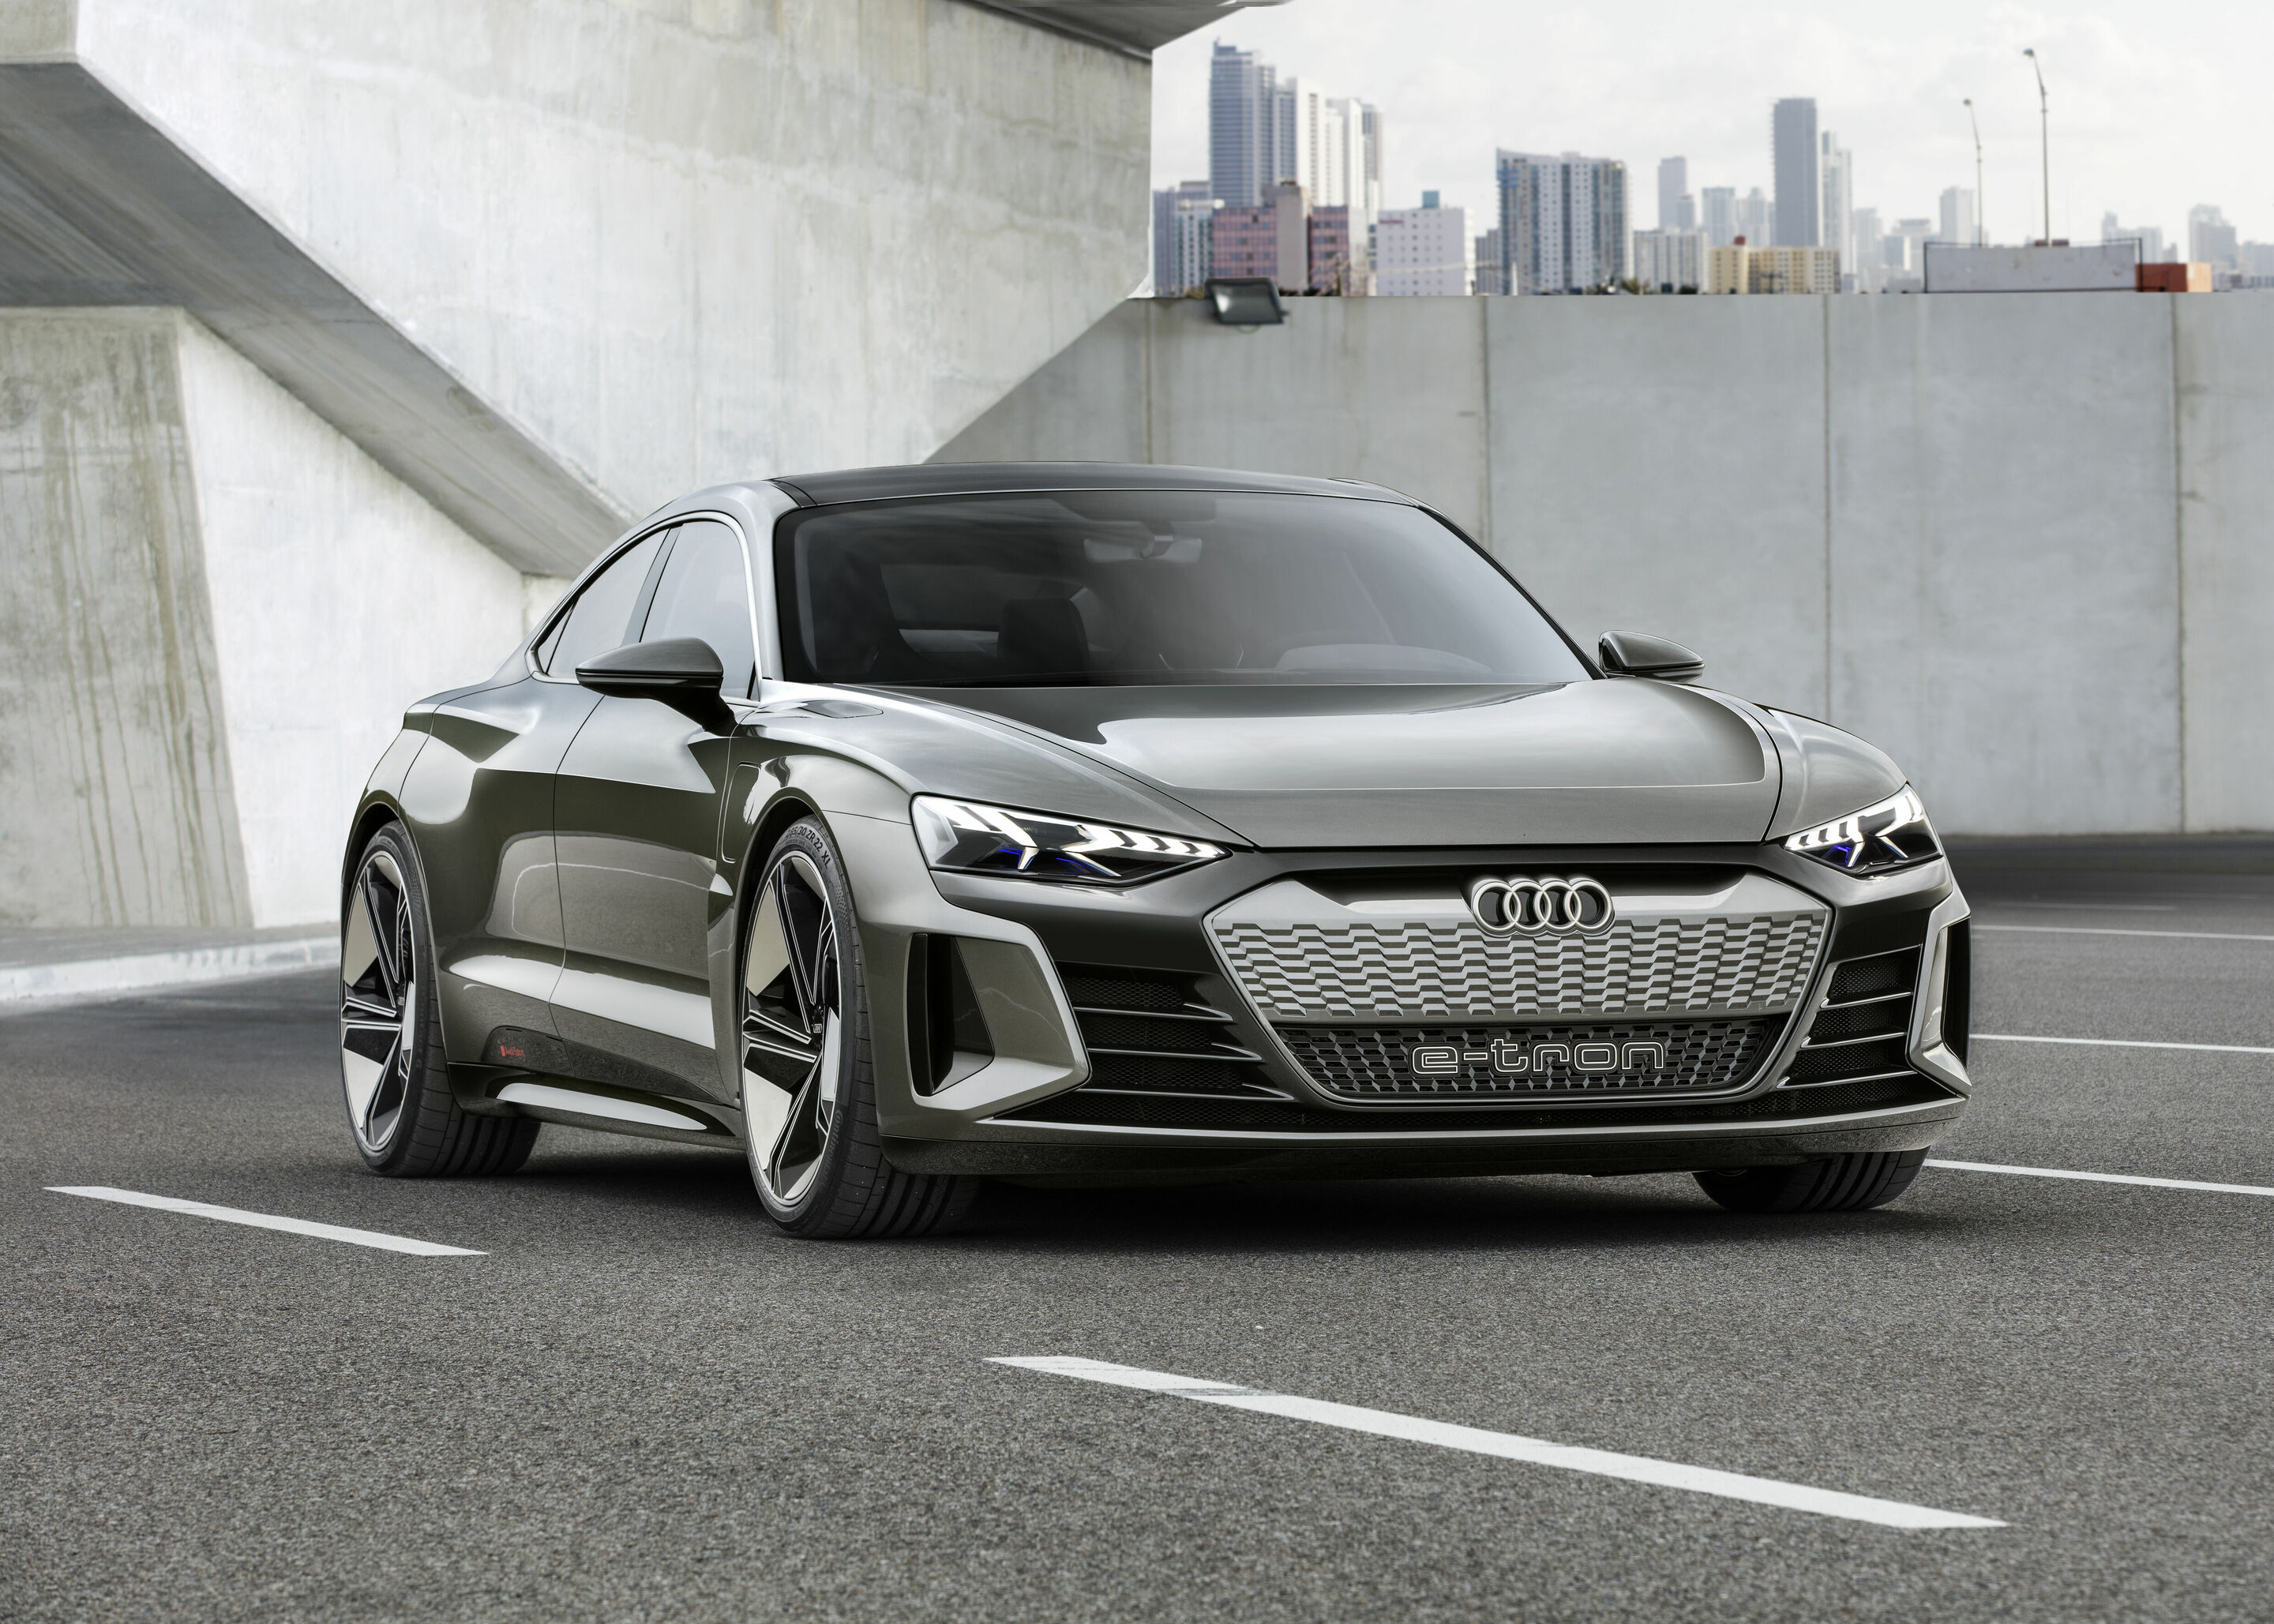 New star in the movie capital – the Audi e-tron GT concept